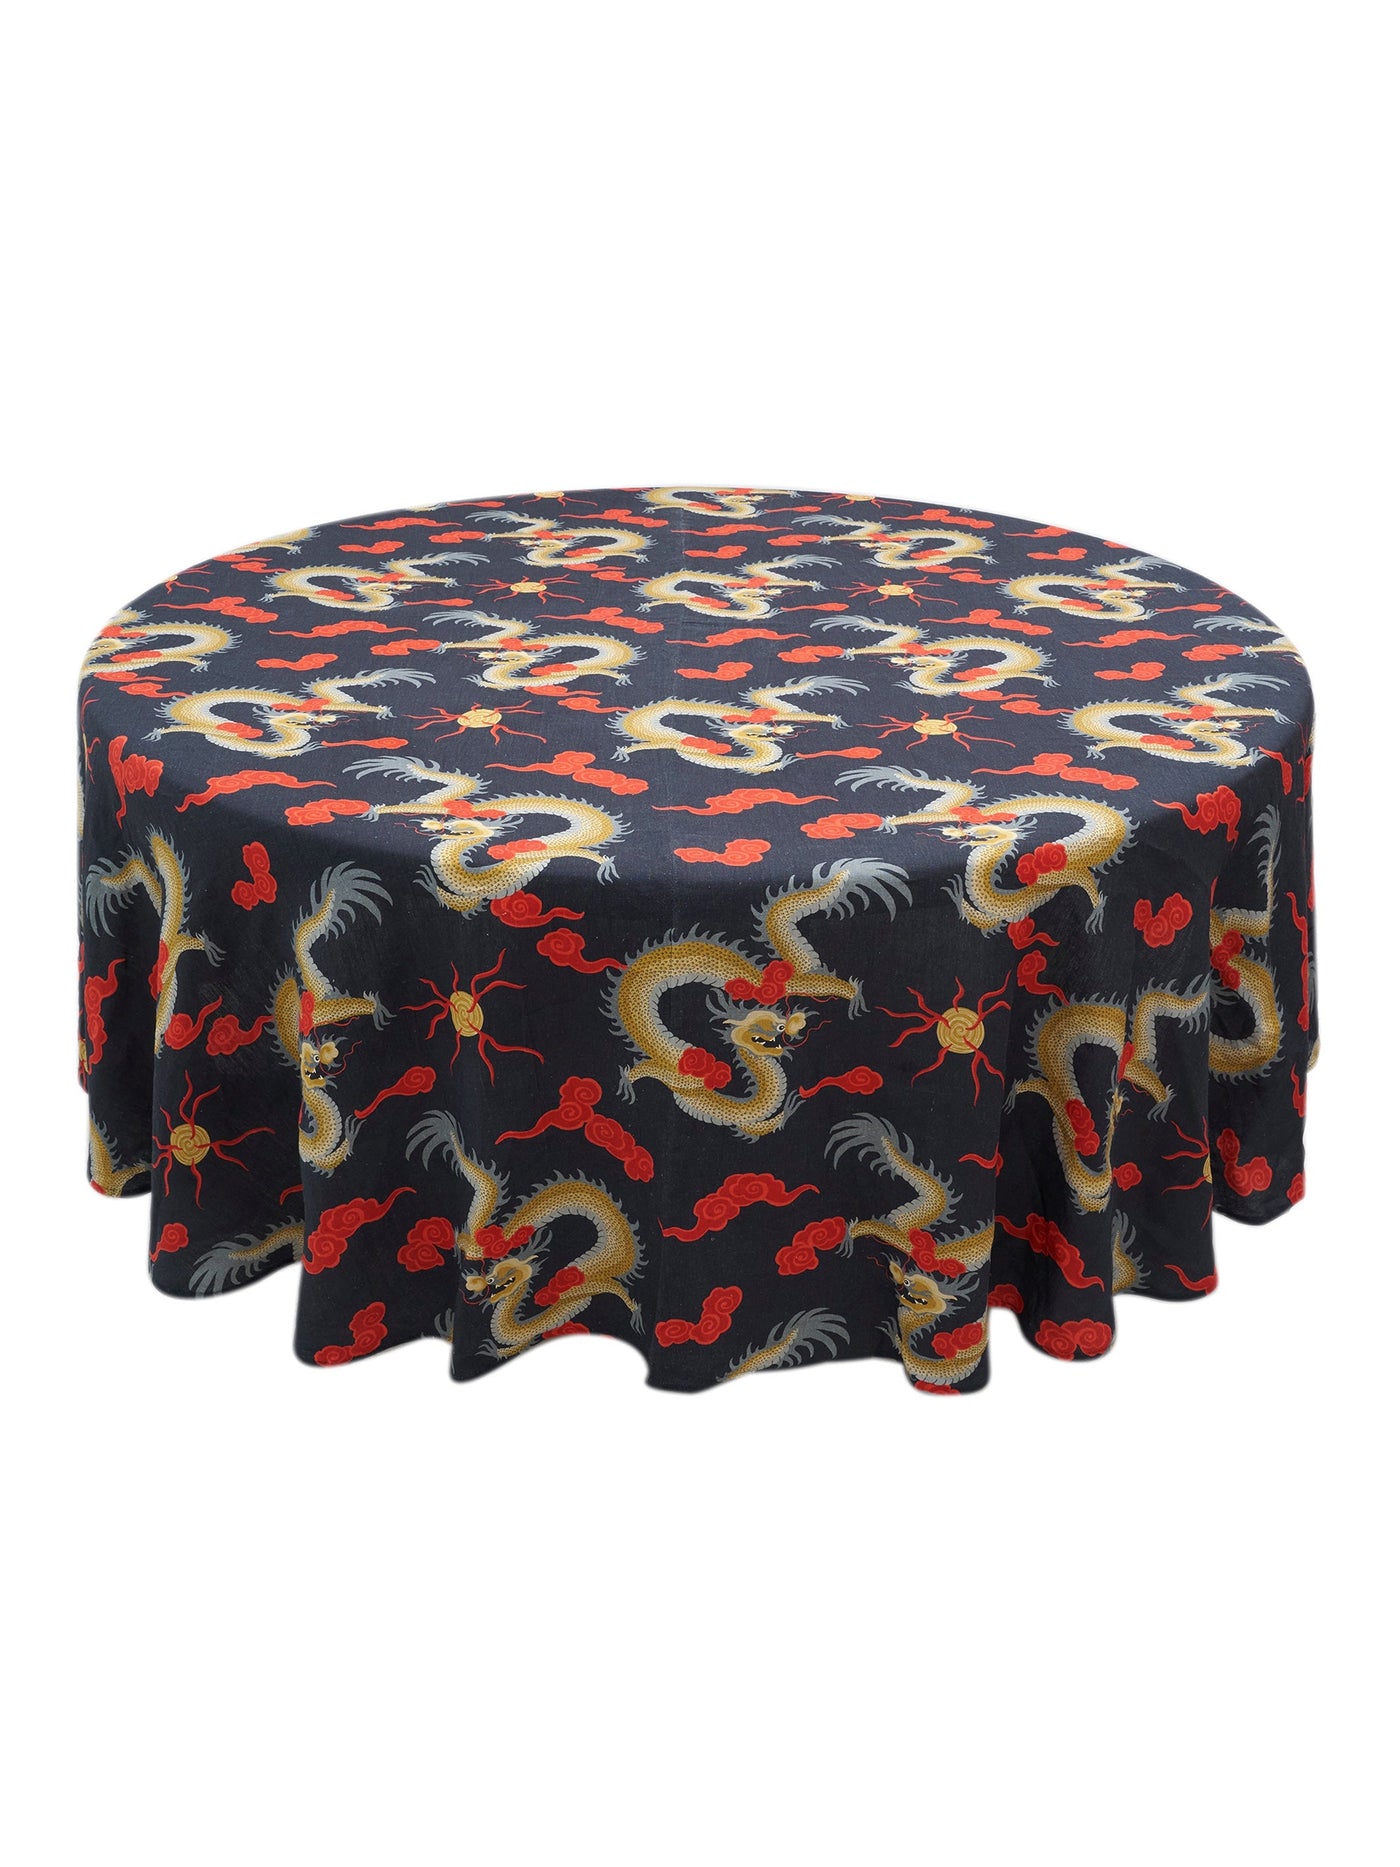 Kowloon Dragon Round Tablecloth featuring a golden ombré dragon set against an onyx background and surrounded by red clouds, hoping to bring all good fortune and joy.  260 cm in diameter and made from Organic cotton linen and GOTS Certified.